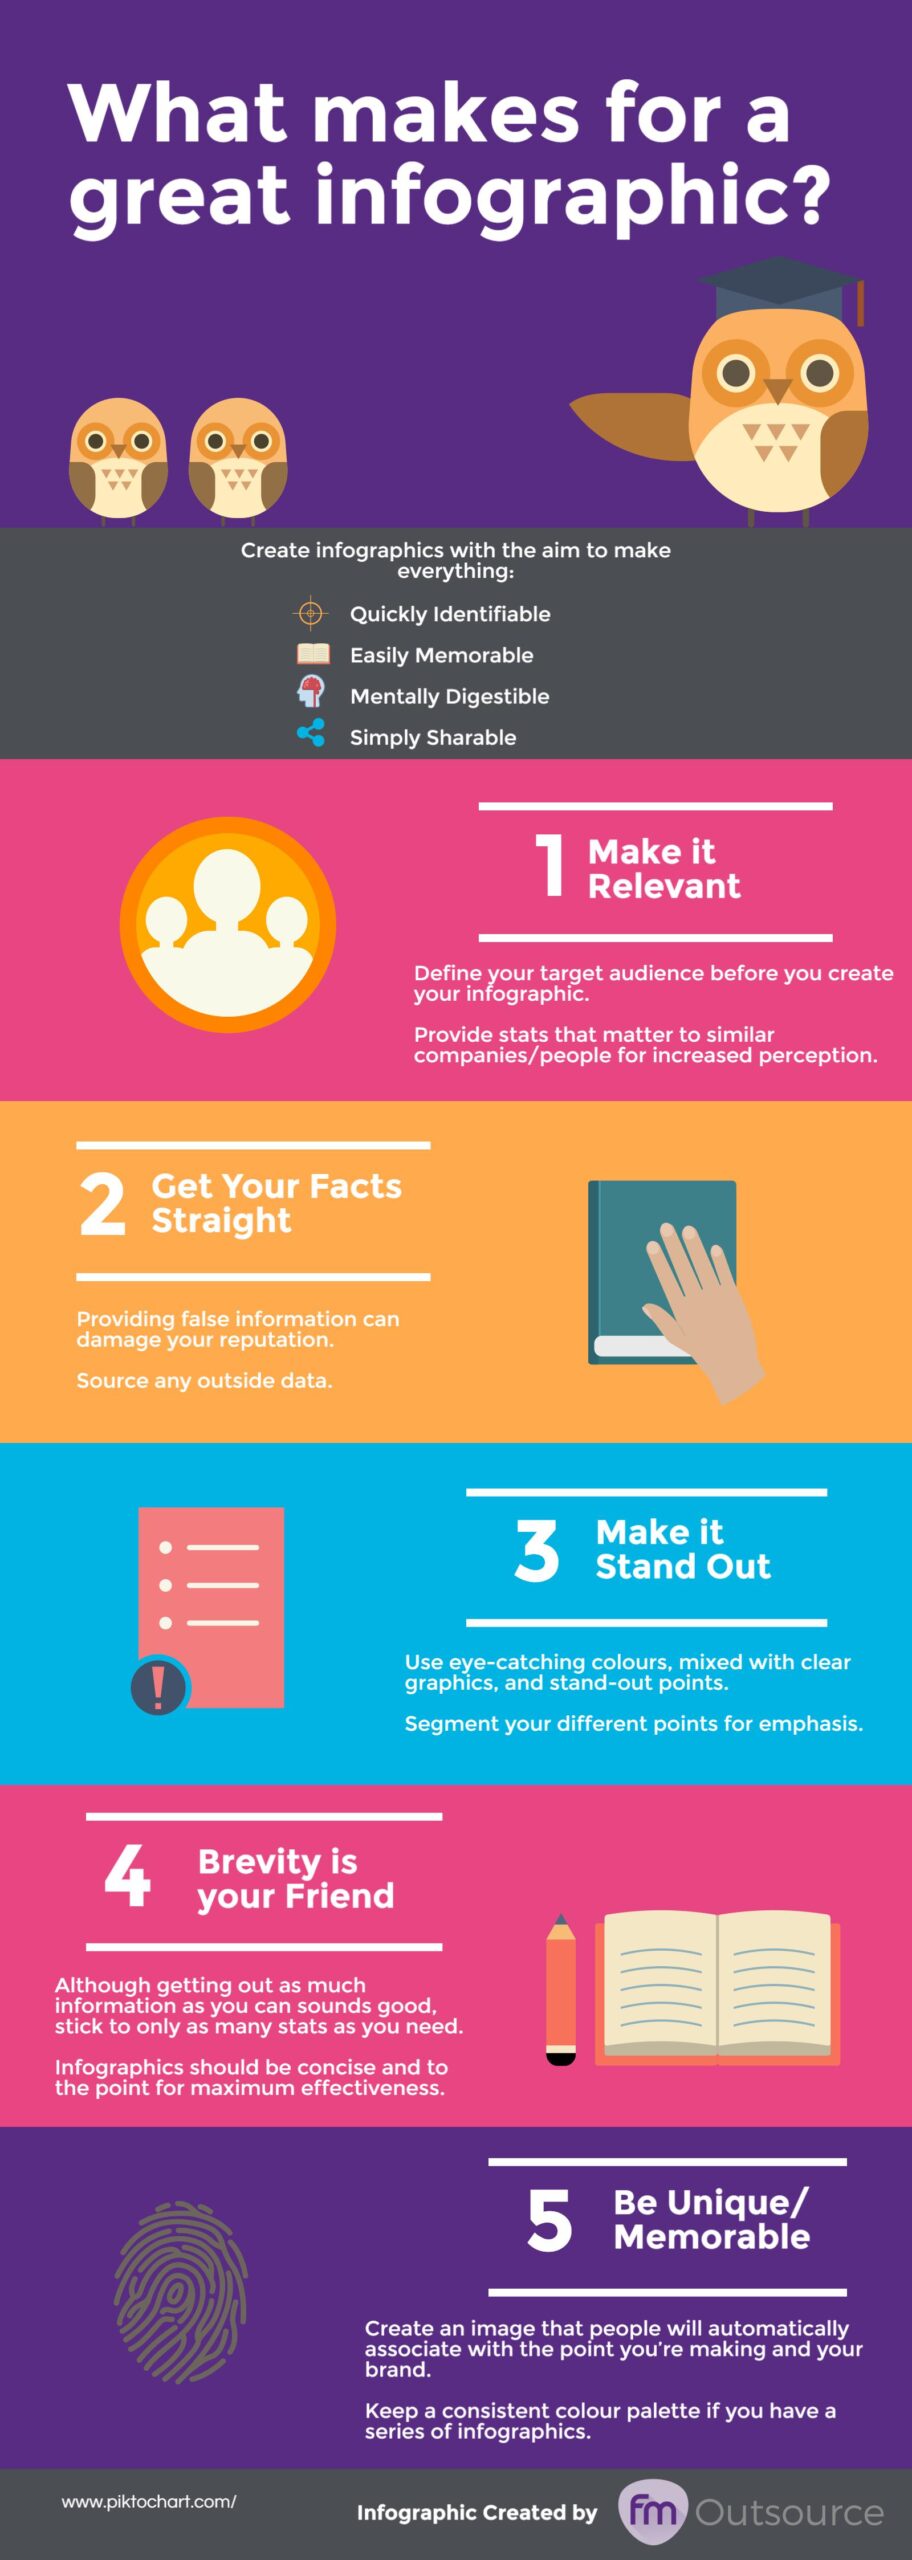 How to create a good infographic | Visual.ly